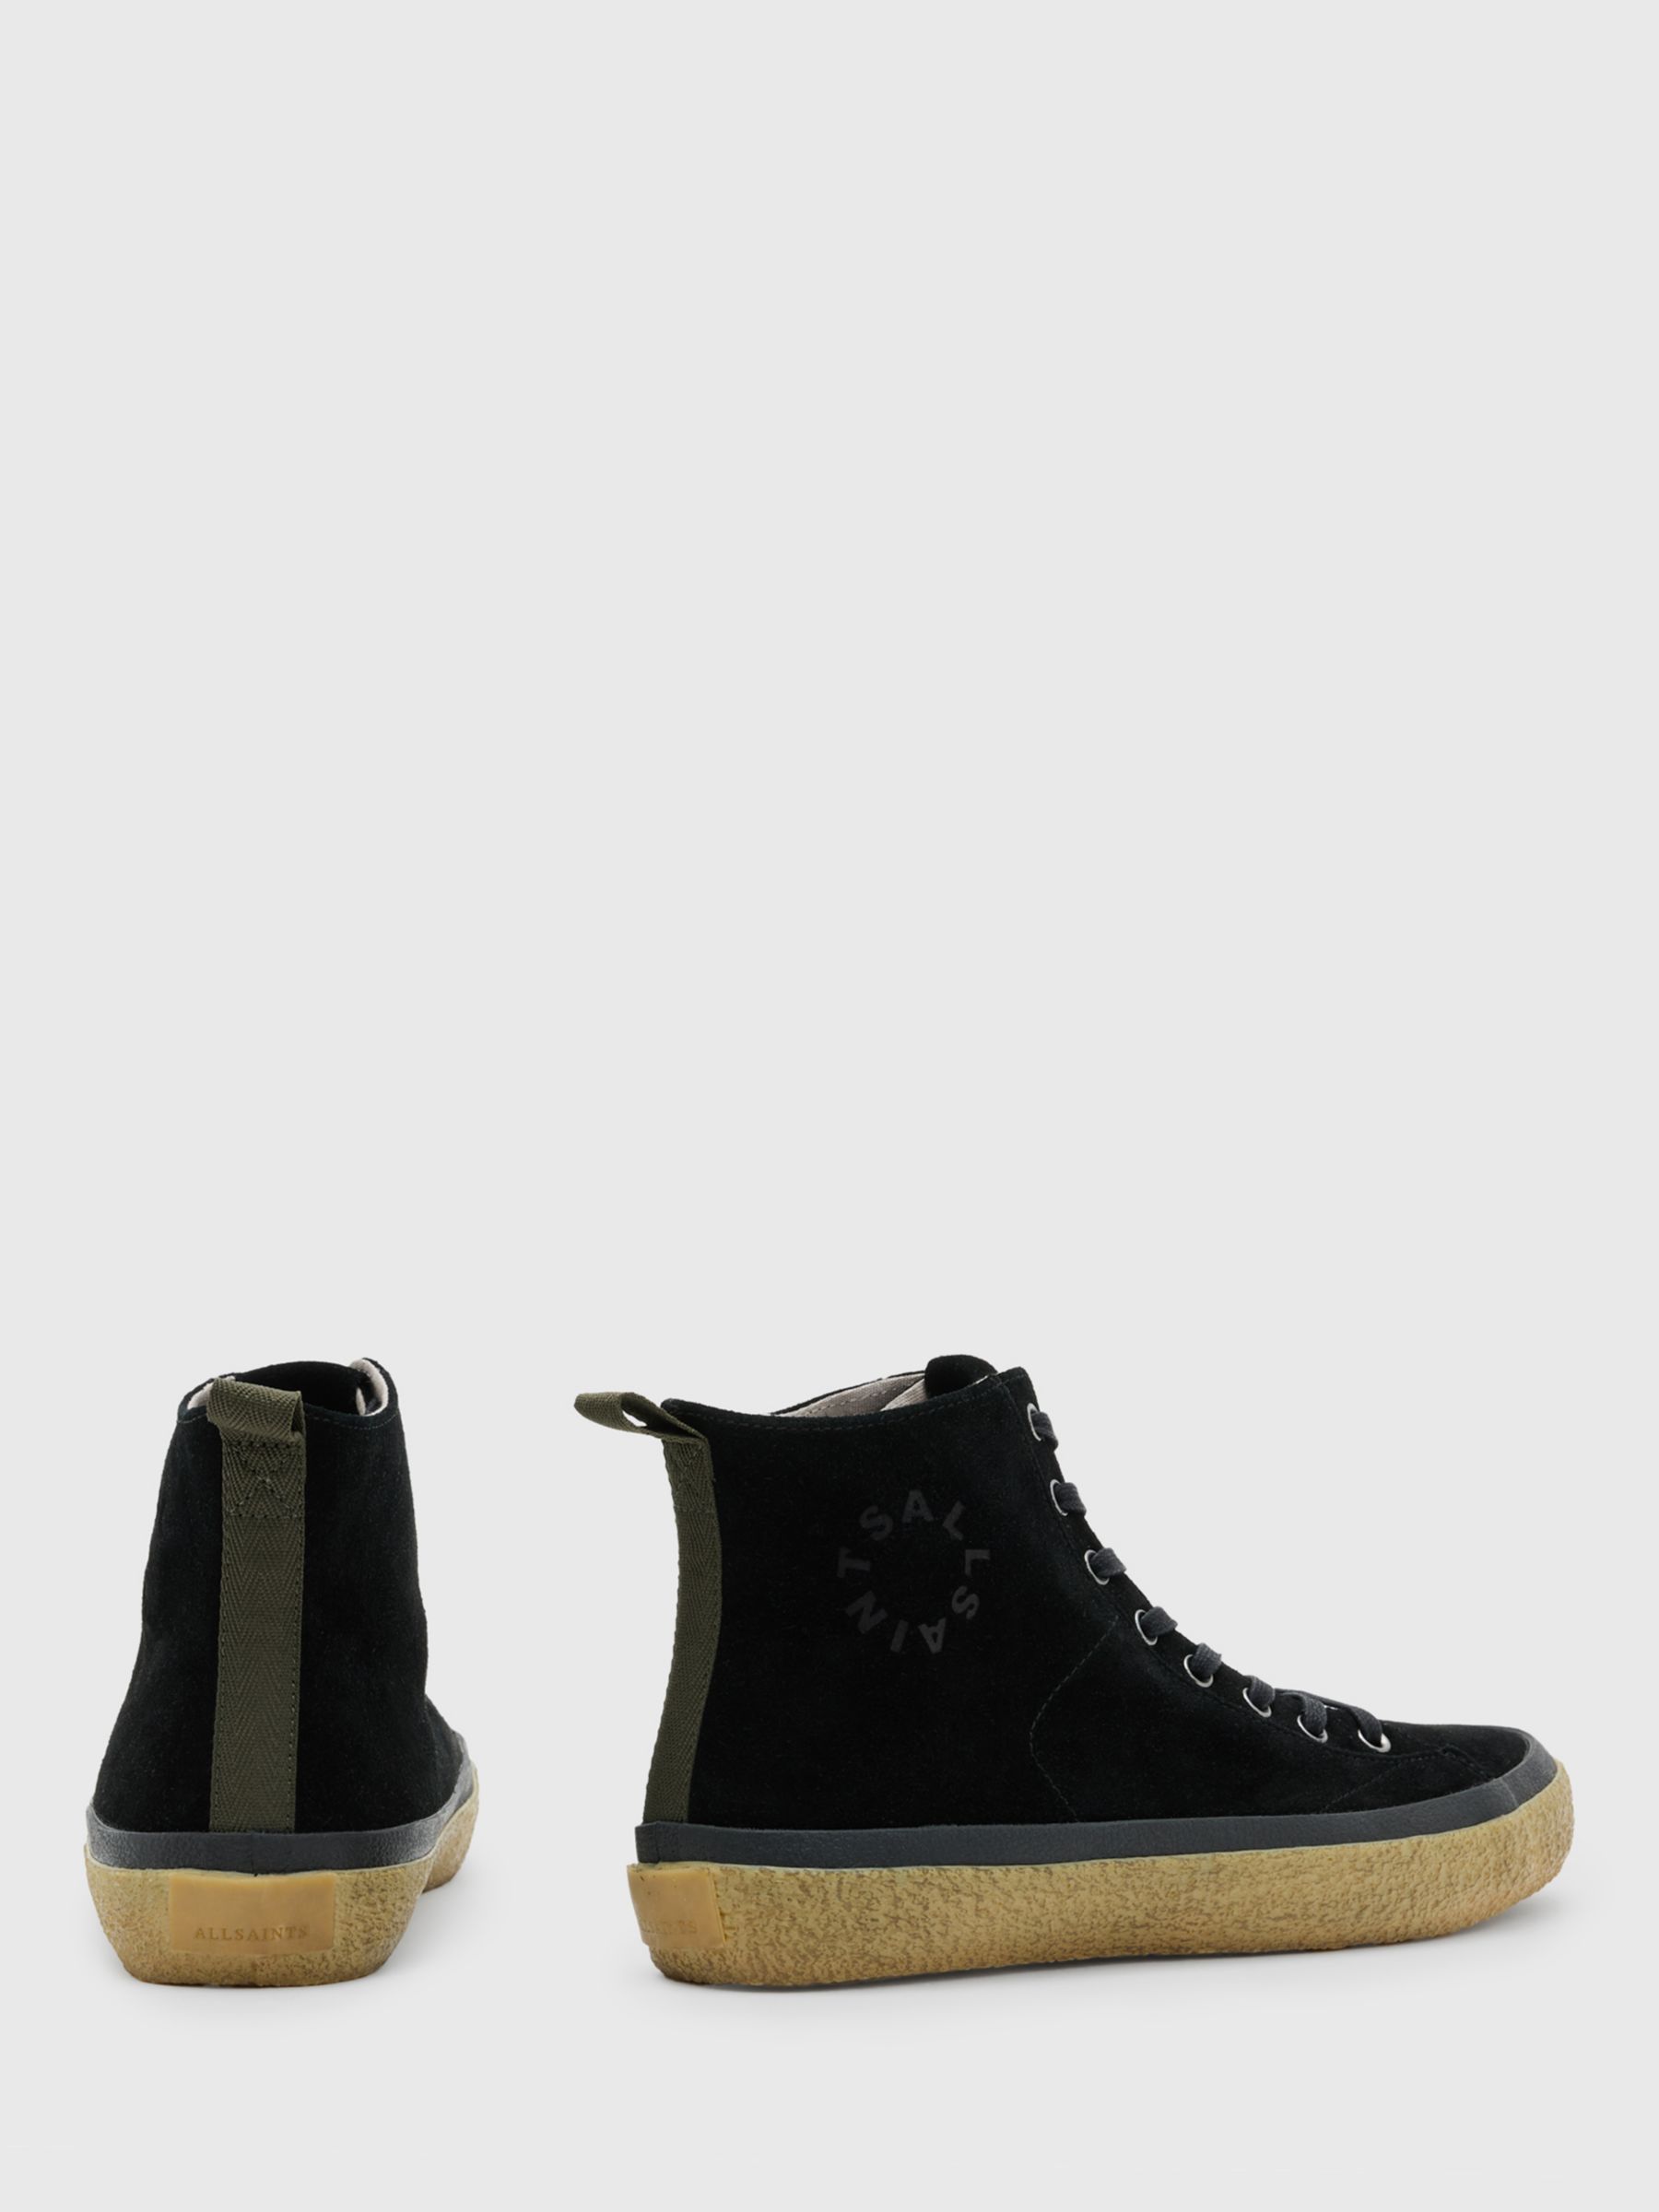 Buy AllSaints Crister High Top Trainers, Black Online at johnlewis.com